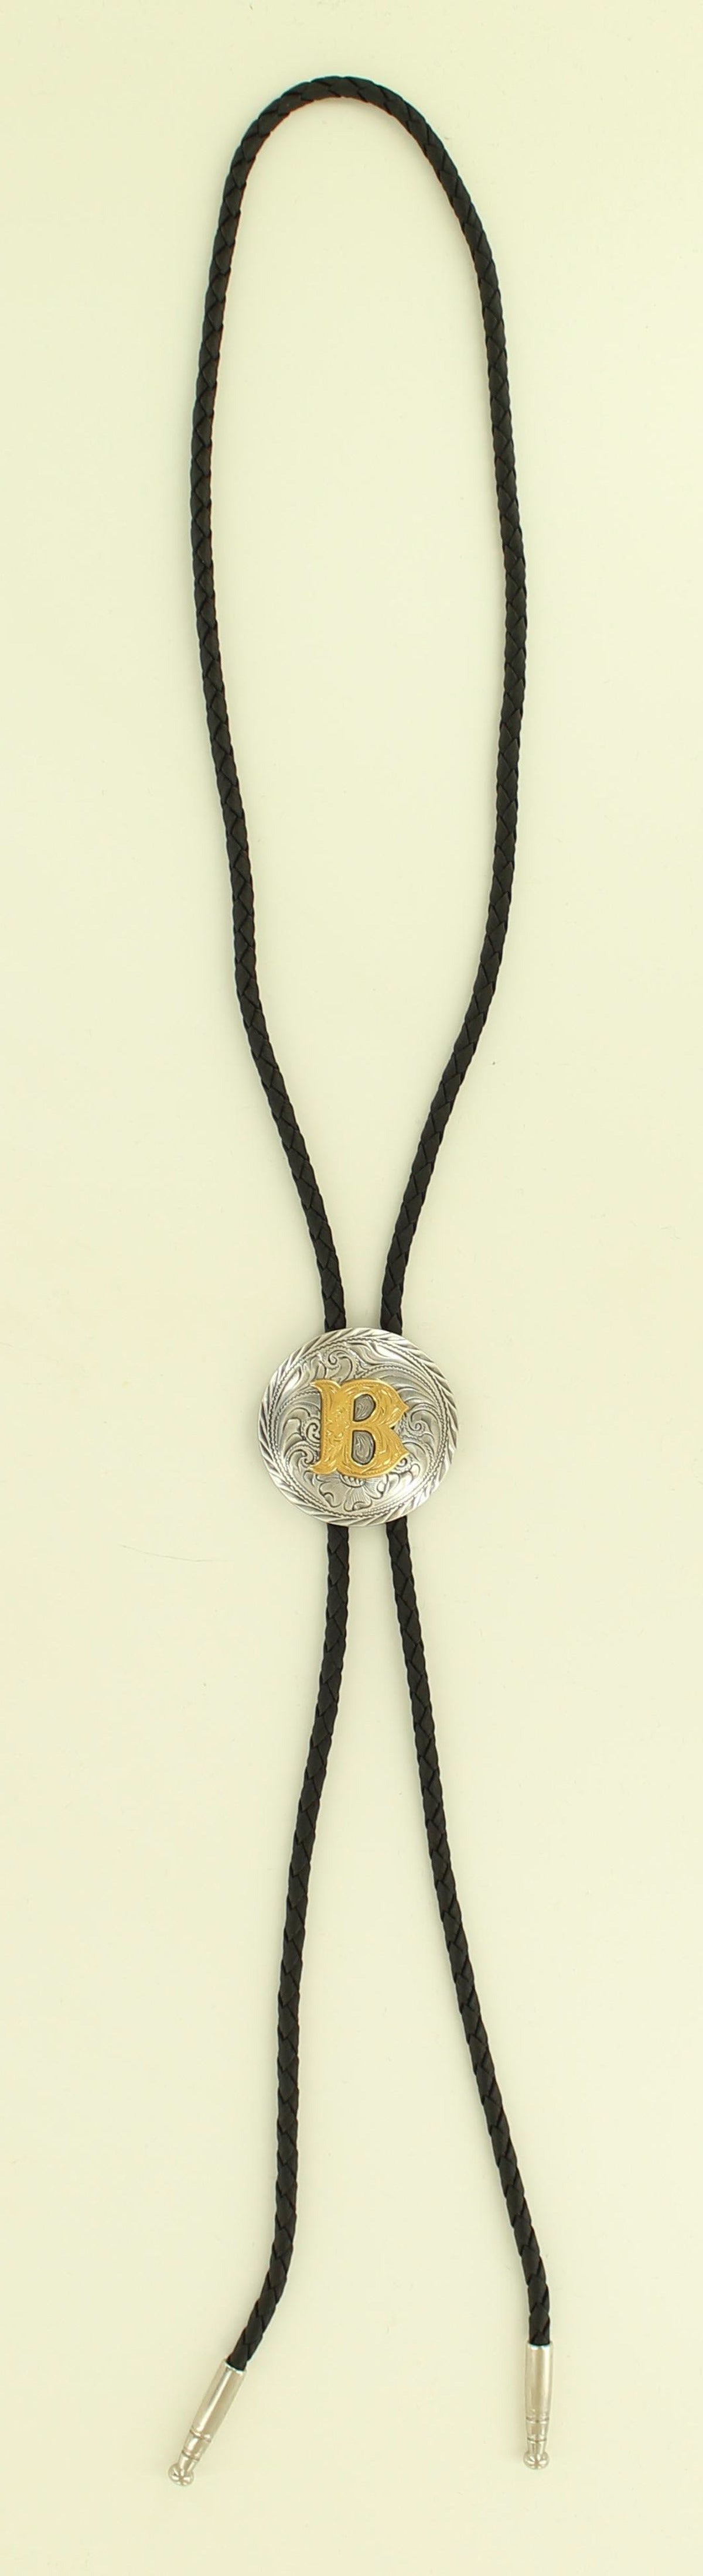 Double S Initial Bolo Tie STYLE 22164